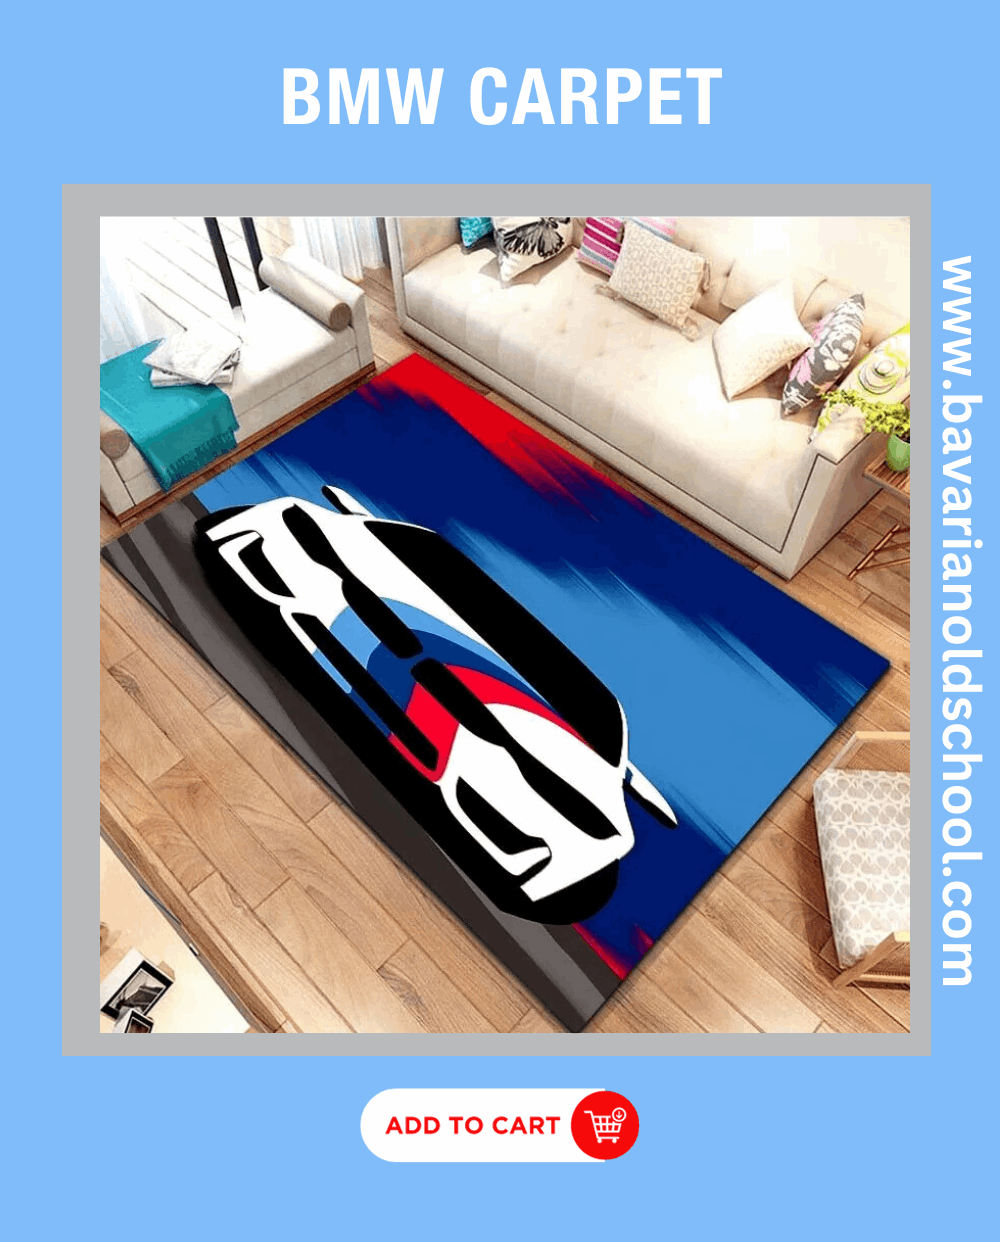 bmw carpet with bmw logo and pictures in all size bavarian old school, bmw bedding set for single or double bed bavarian old school, Bavarian Old School, germany, slovenia, austria, bmw owner, bmw lovers, bmw old school, dream garage, bmw collection, dream car, dream bmw, car care, bmw detailing, m3, m5, m8, z8, e30, e 36, e39, e46, bmw models, bmw m power, bmw repair, bmw service, bmw selling, bmw dealer, old bmw, classic cars, vintage cars, old school